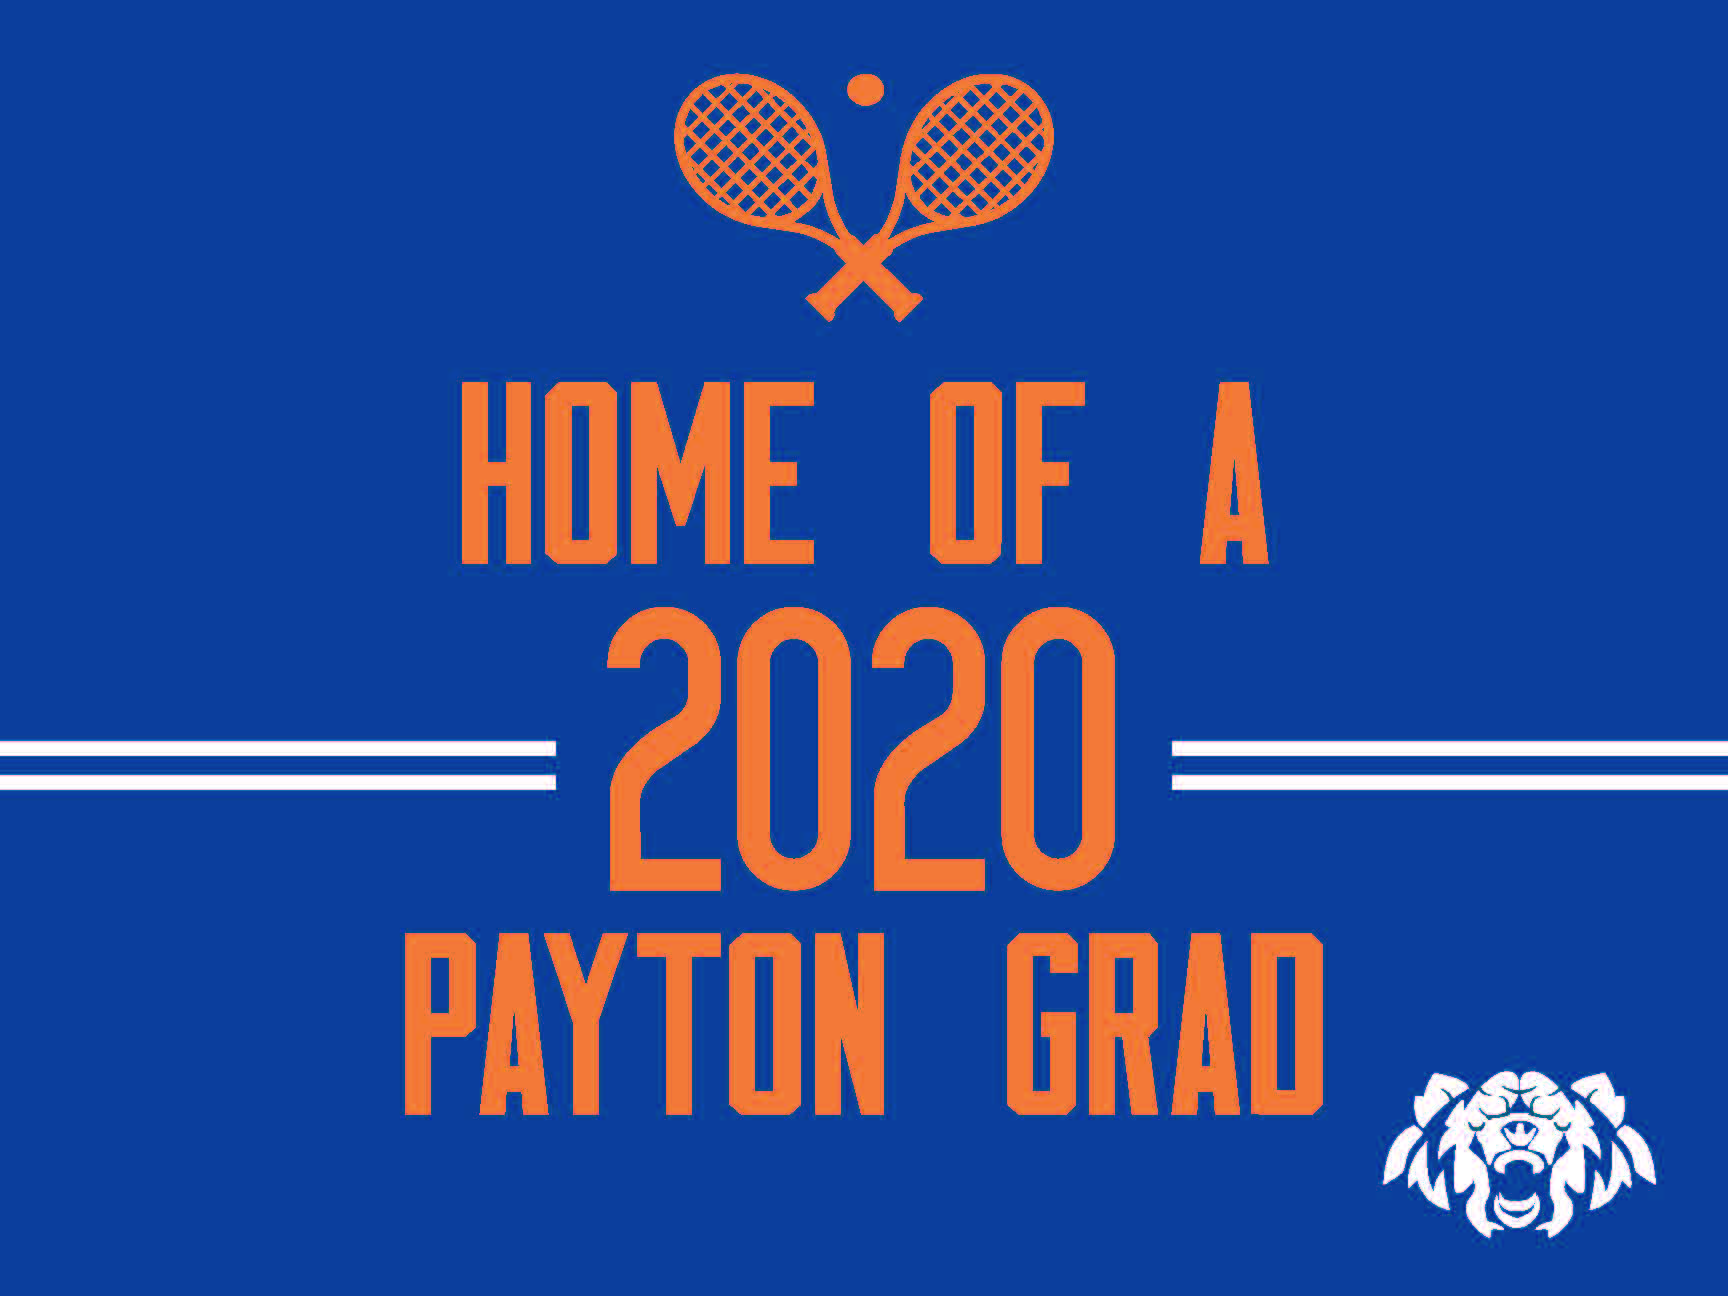 home of a 2020 payton grad signage